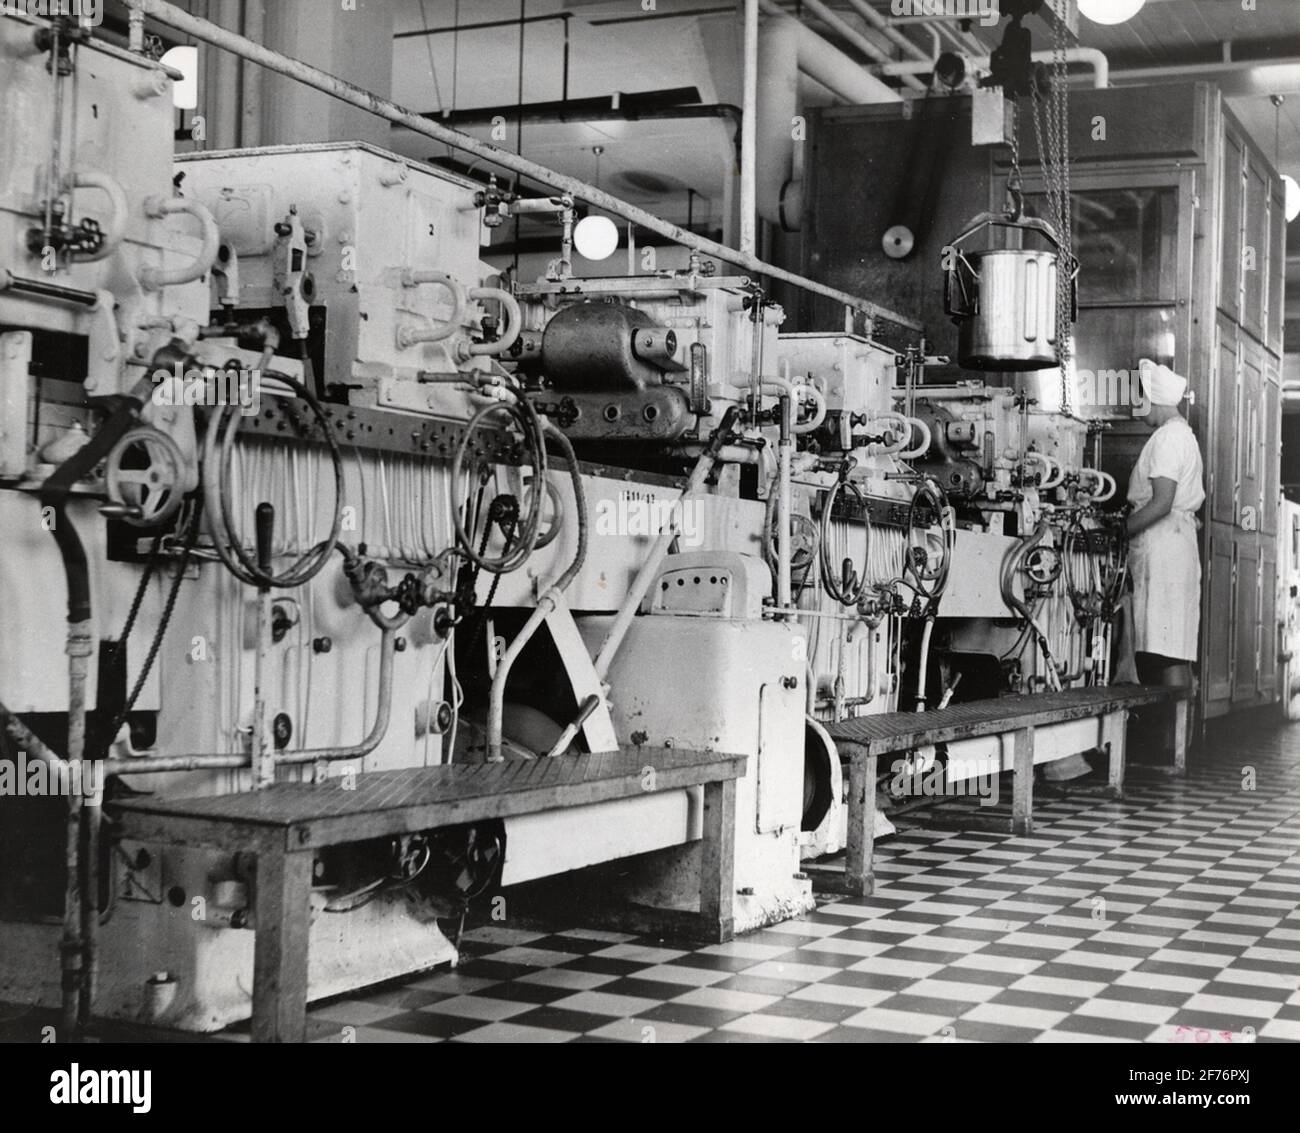 AB Cloetta, Ljungsbro, Interior. Filled chocolate with liquid fillings is manufactured in this facility. Here, the fillings are automatically sprayed into the chocolate shapes, which pass on a conveyor belt under the casting machines. Stock Photo